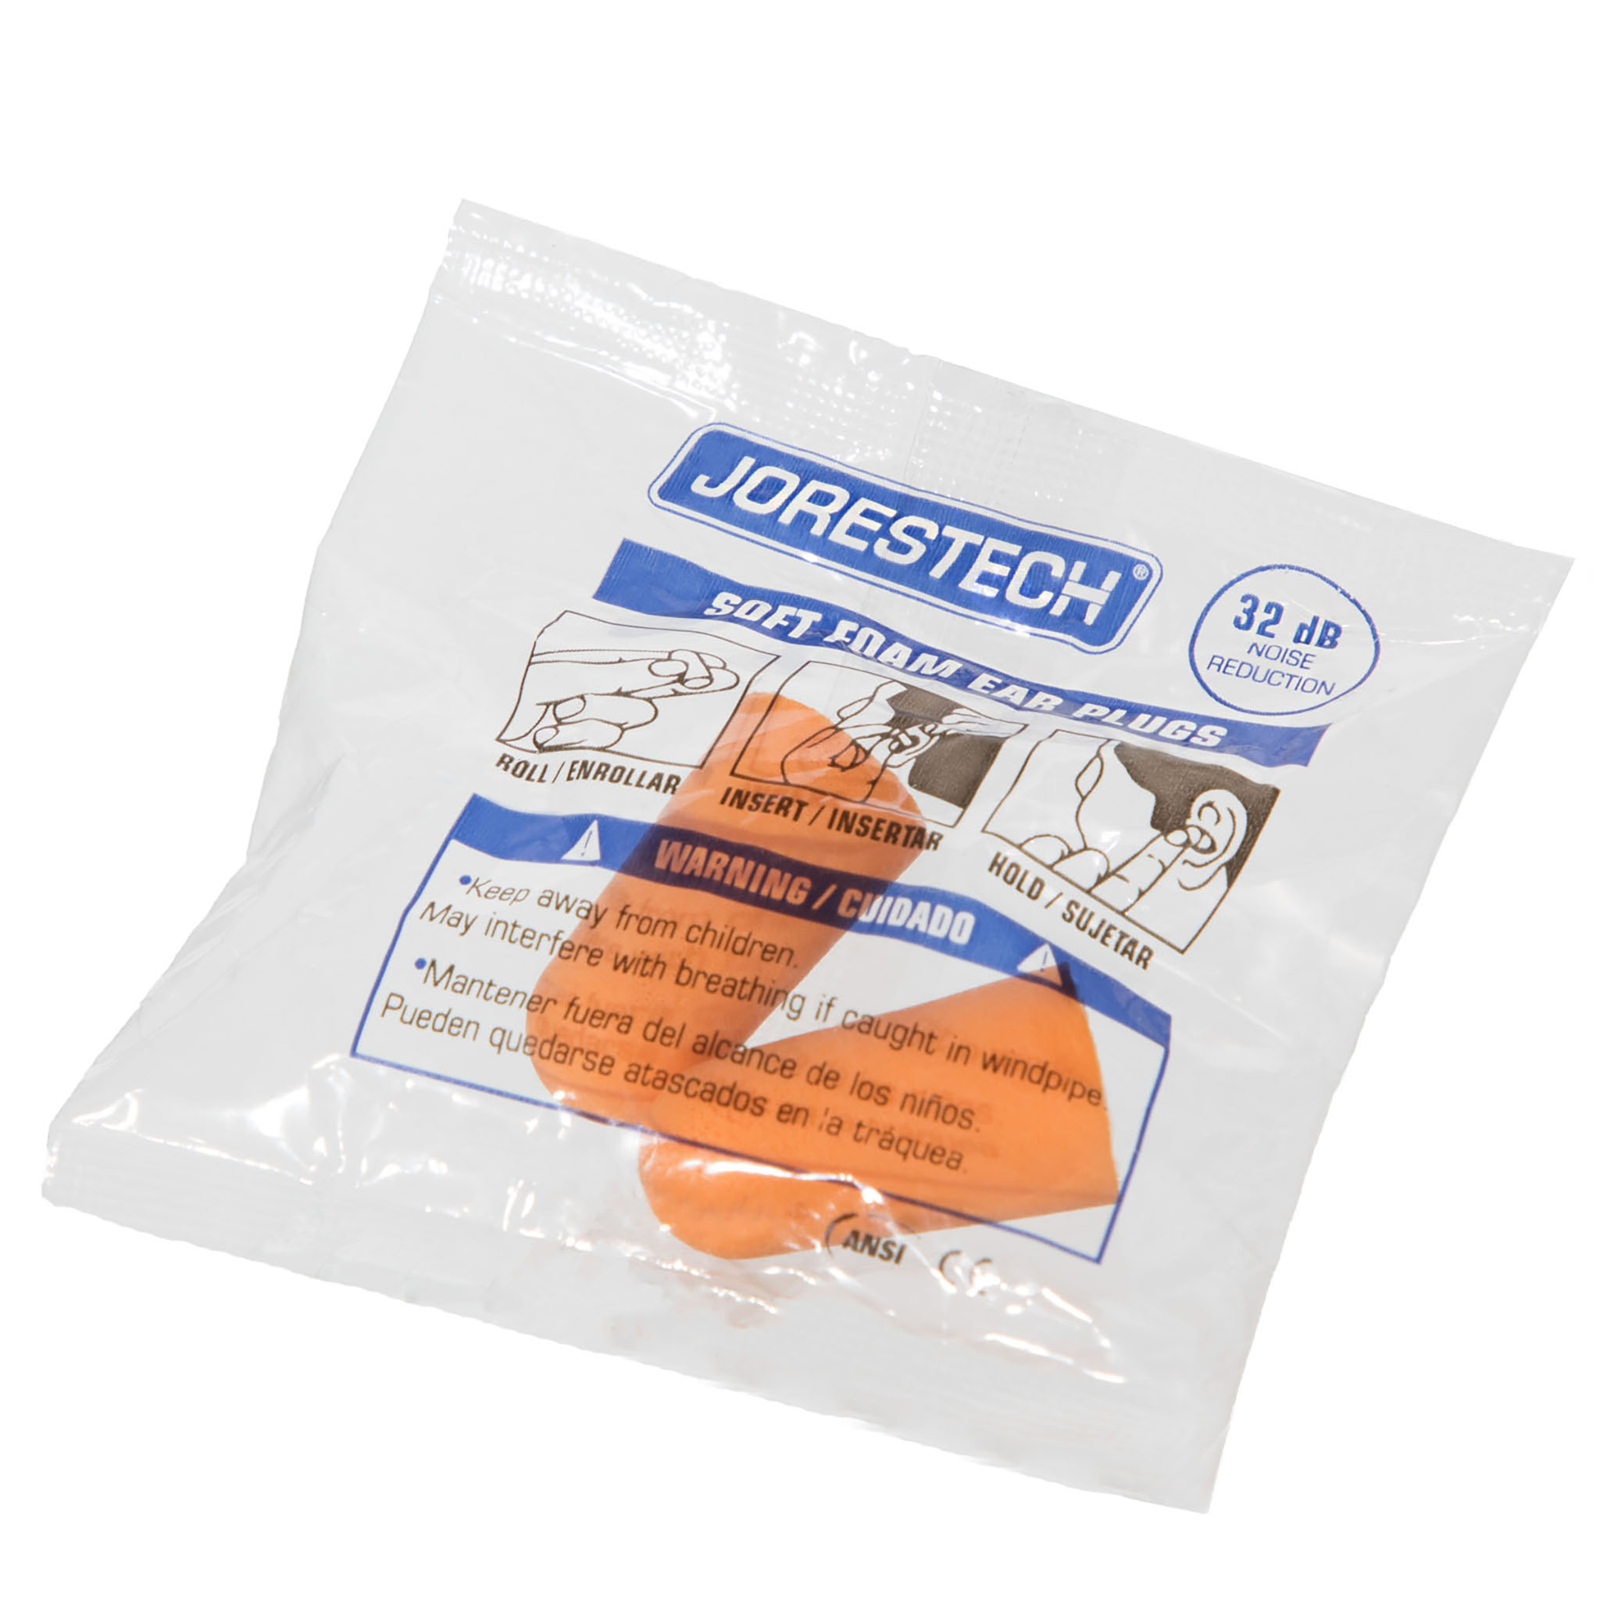 Close up show the packaging of one set of JORESTECH ear plugs. A clear bag is used which has instruction of how to use and also has warning instruction to keep away from children